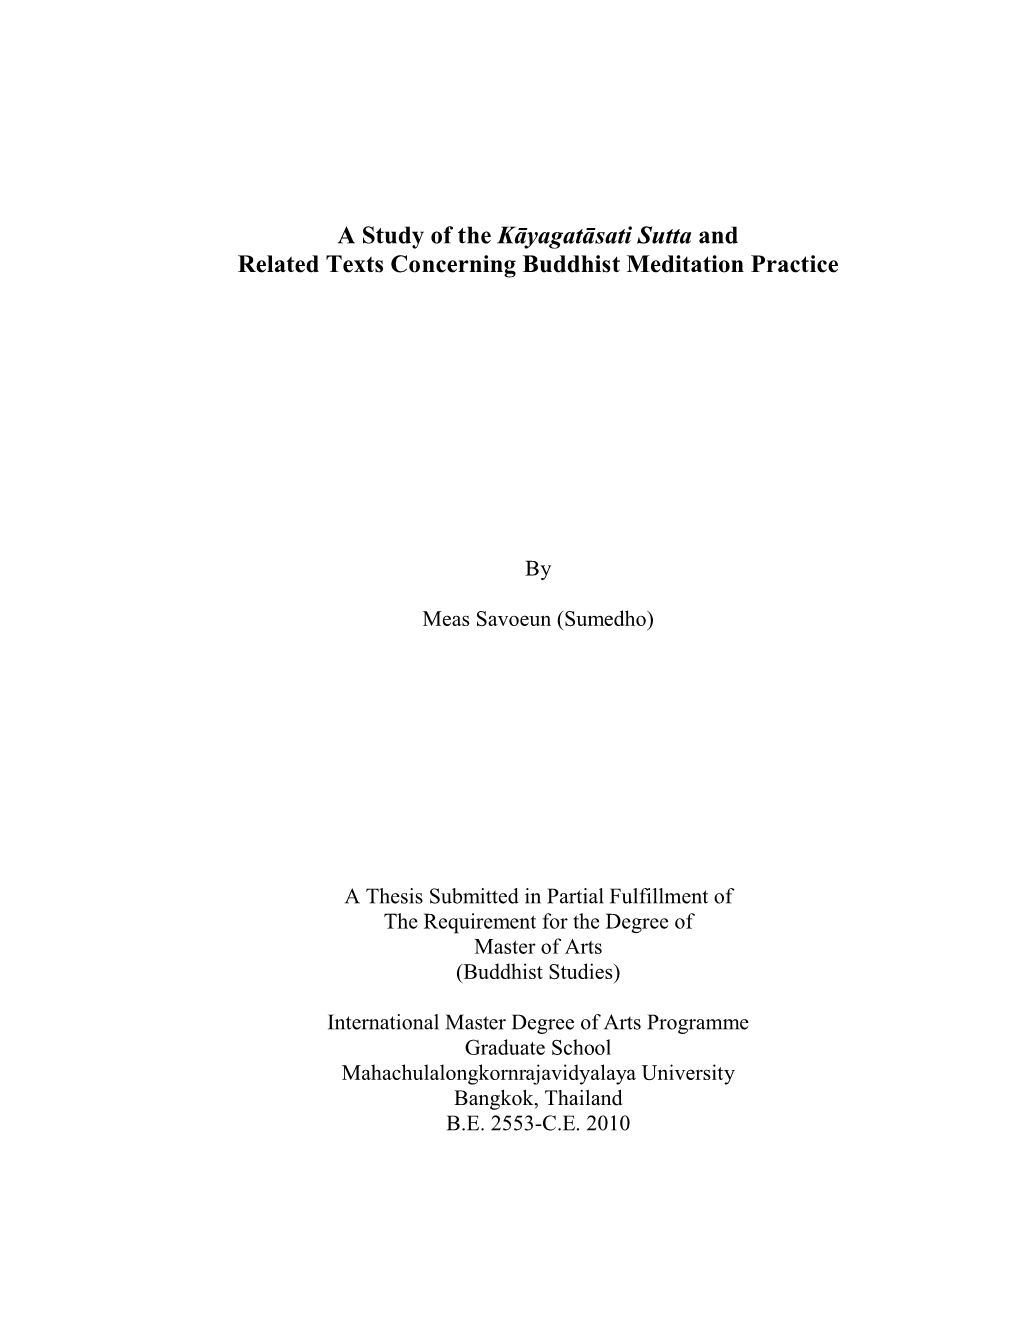 A Study of the Kāyagatāsati Sutta and Related Texts Concerning Buddhist Meditation Practice